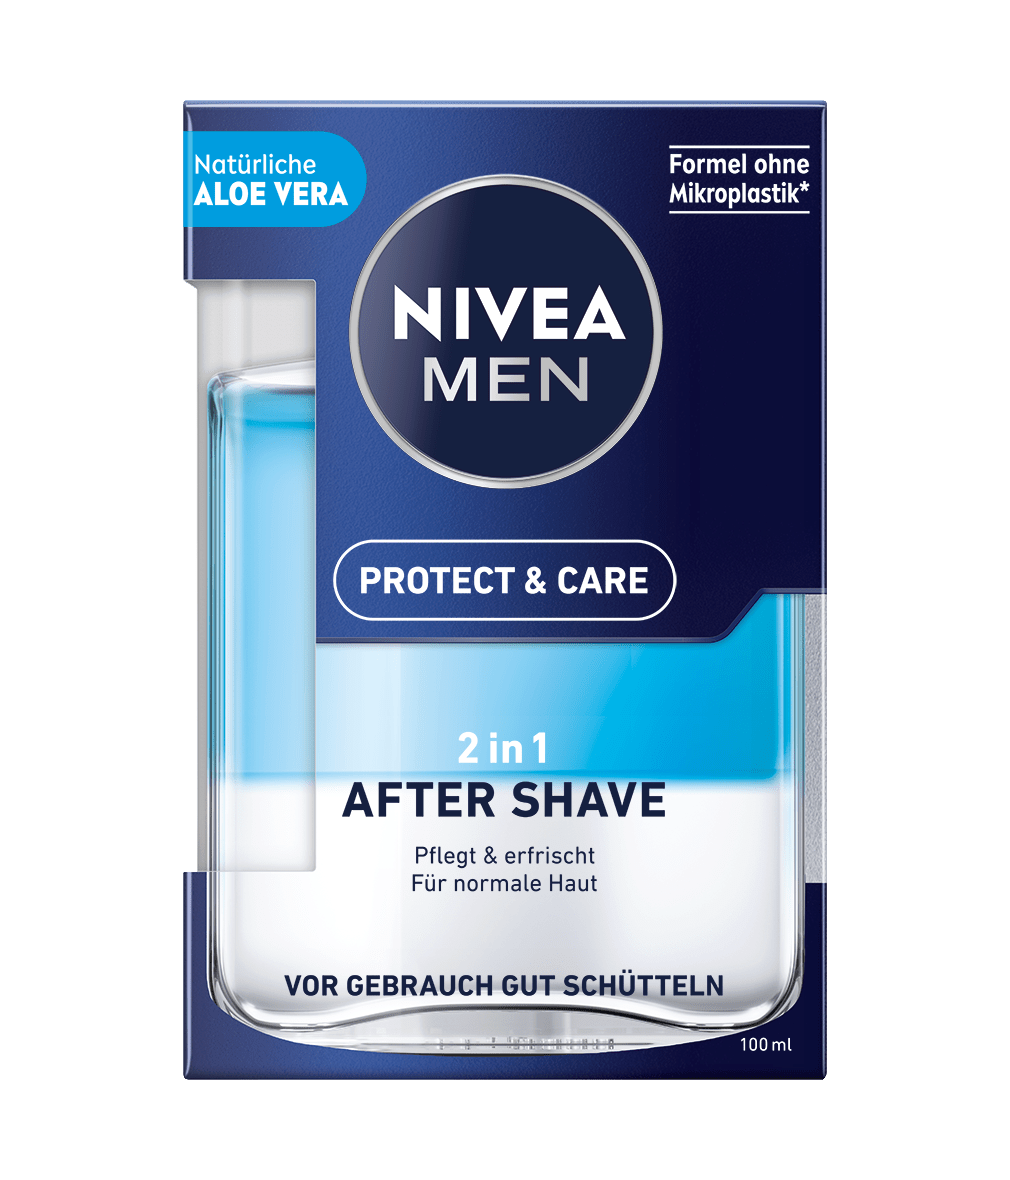 NIVEA MEN PROTECT & CARE	2in1 After Shave_100ml